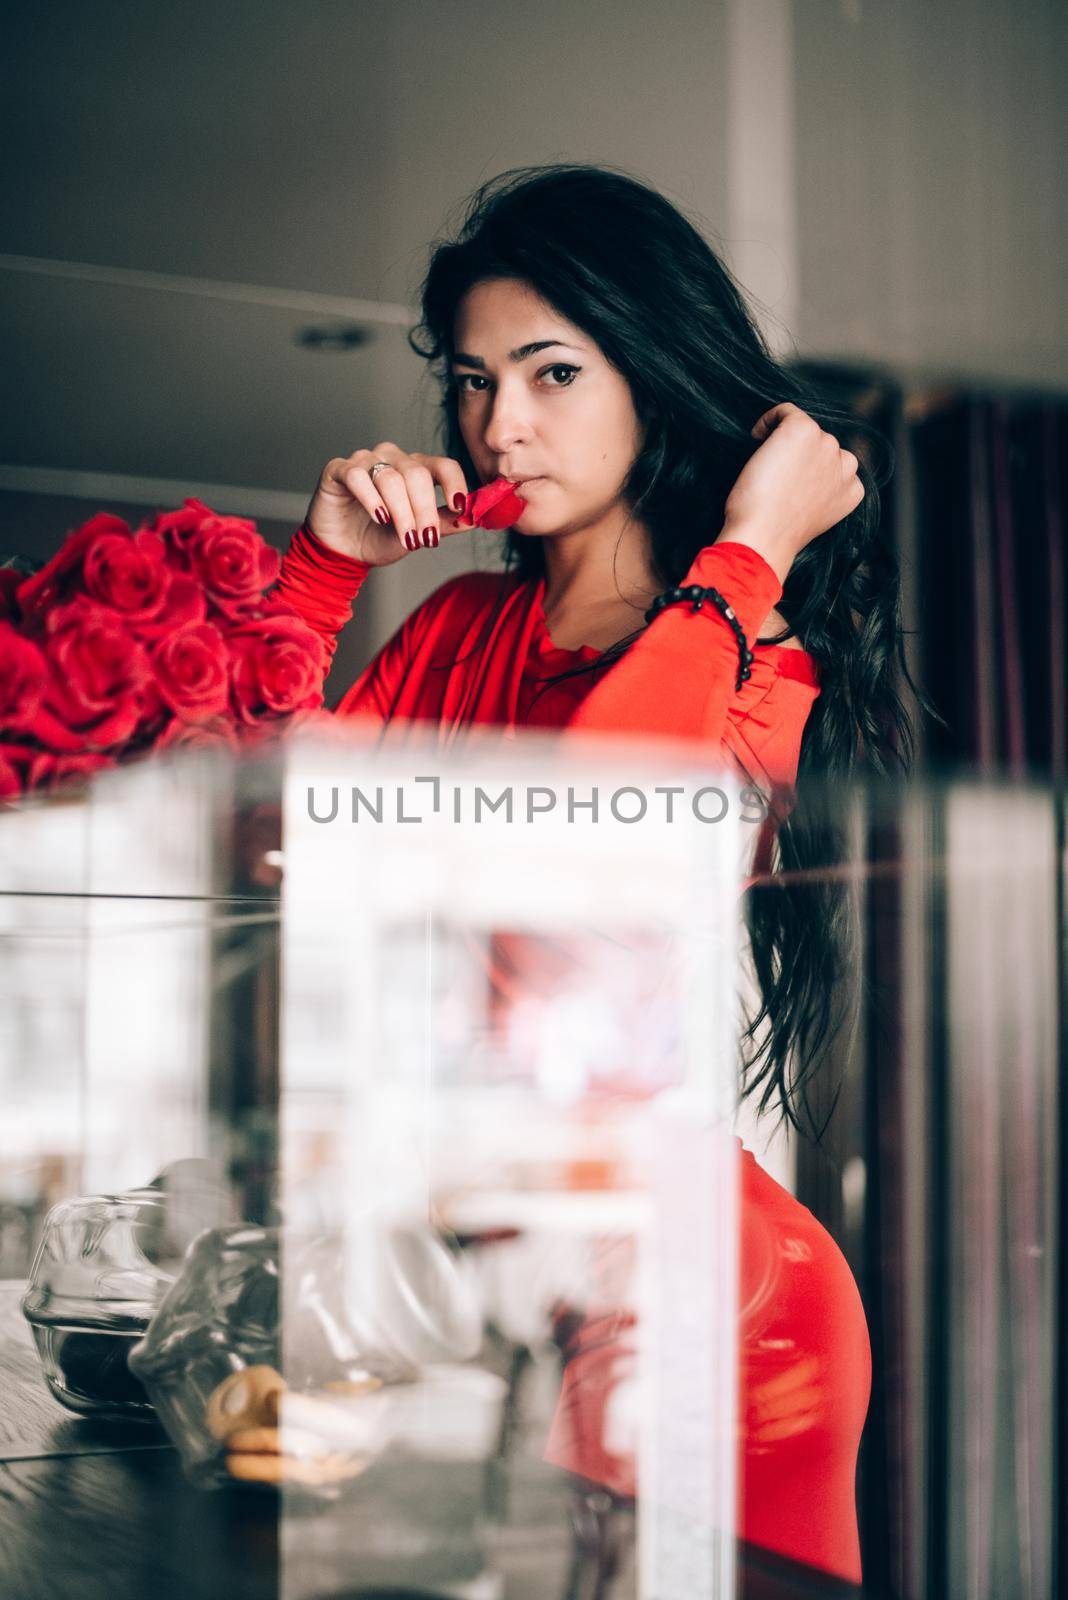 Charming young woman in red sexy dress posing with a bouquet of red roses. photo of a seductive woman with black hair. Selective focus, filmgrain